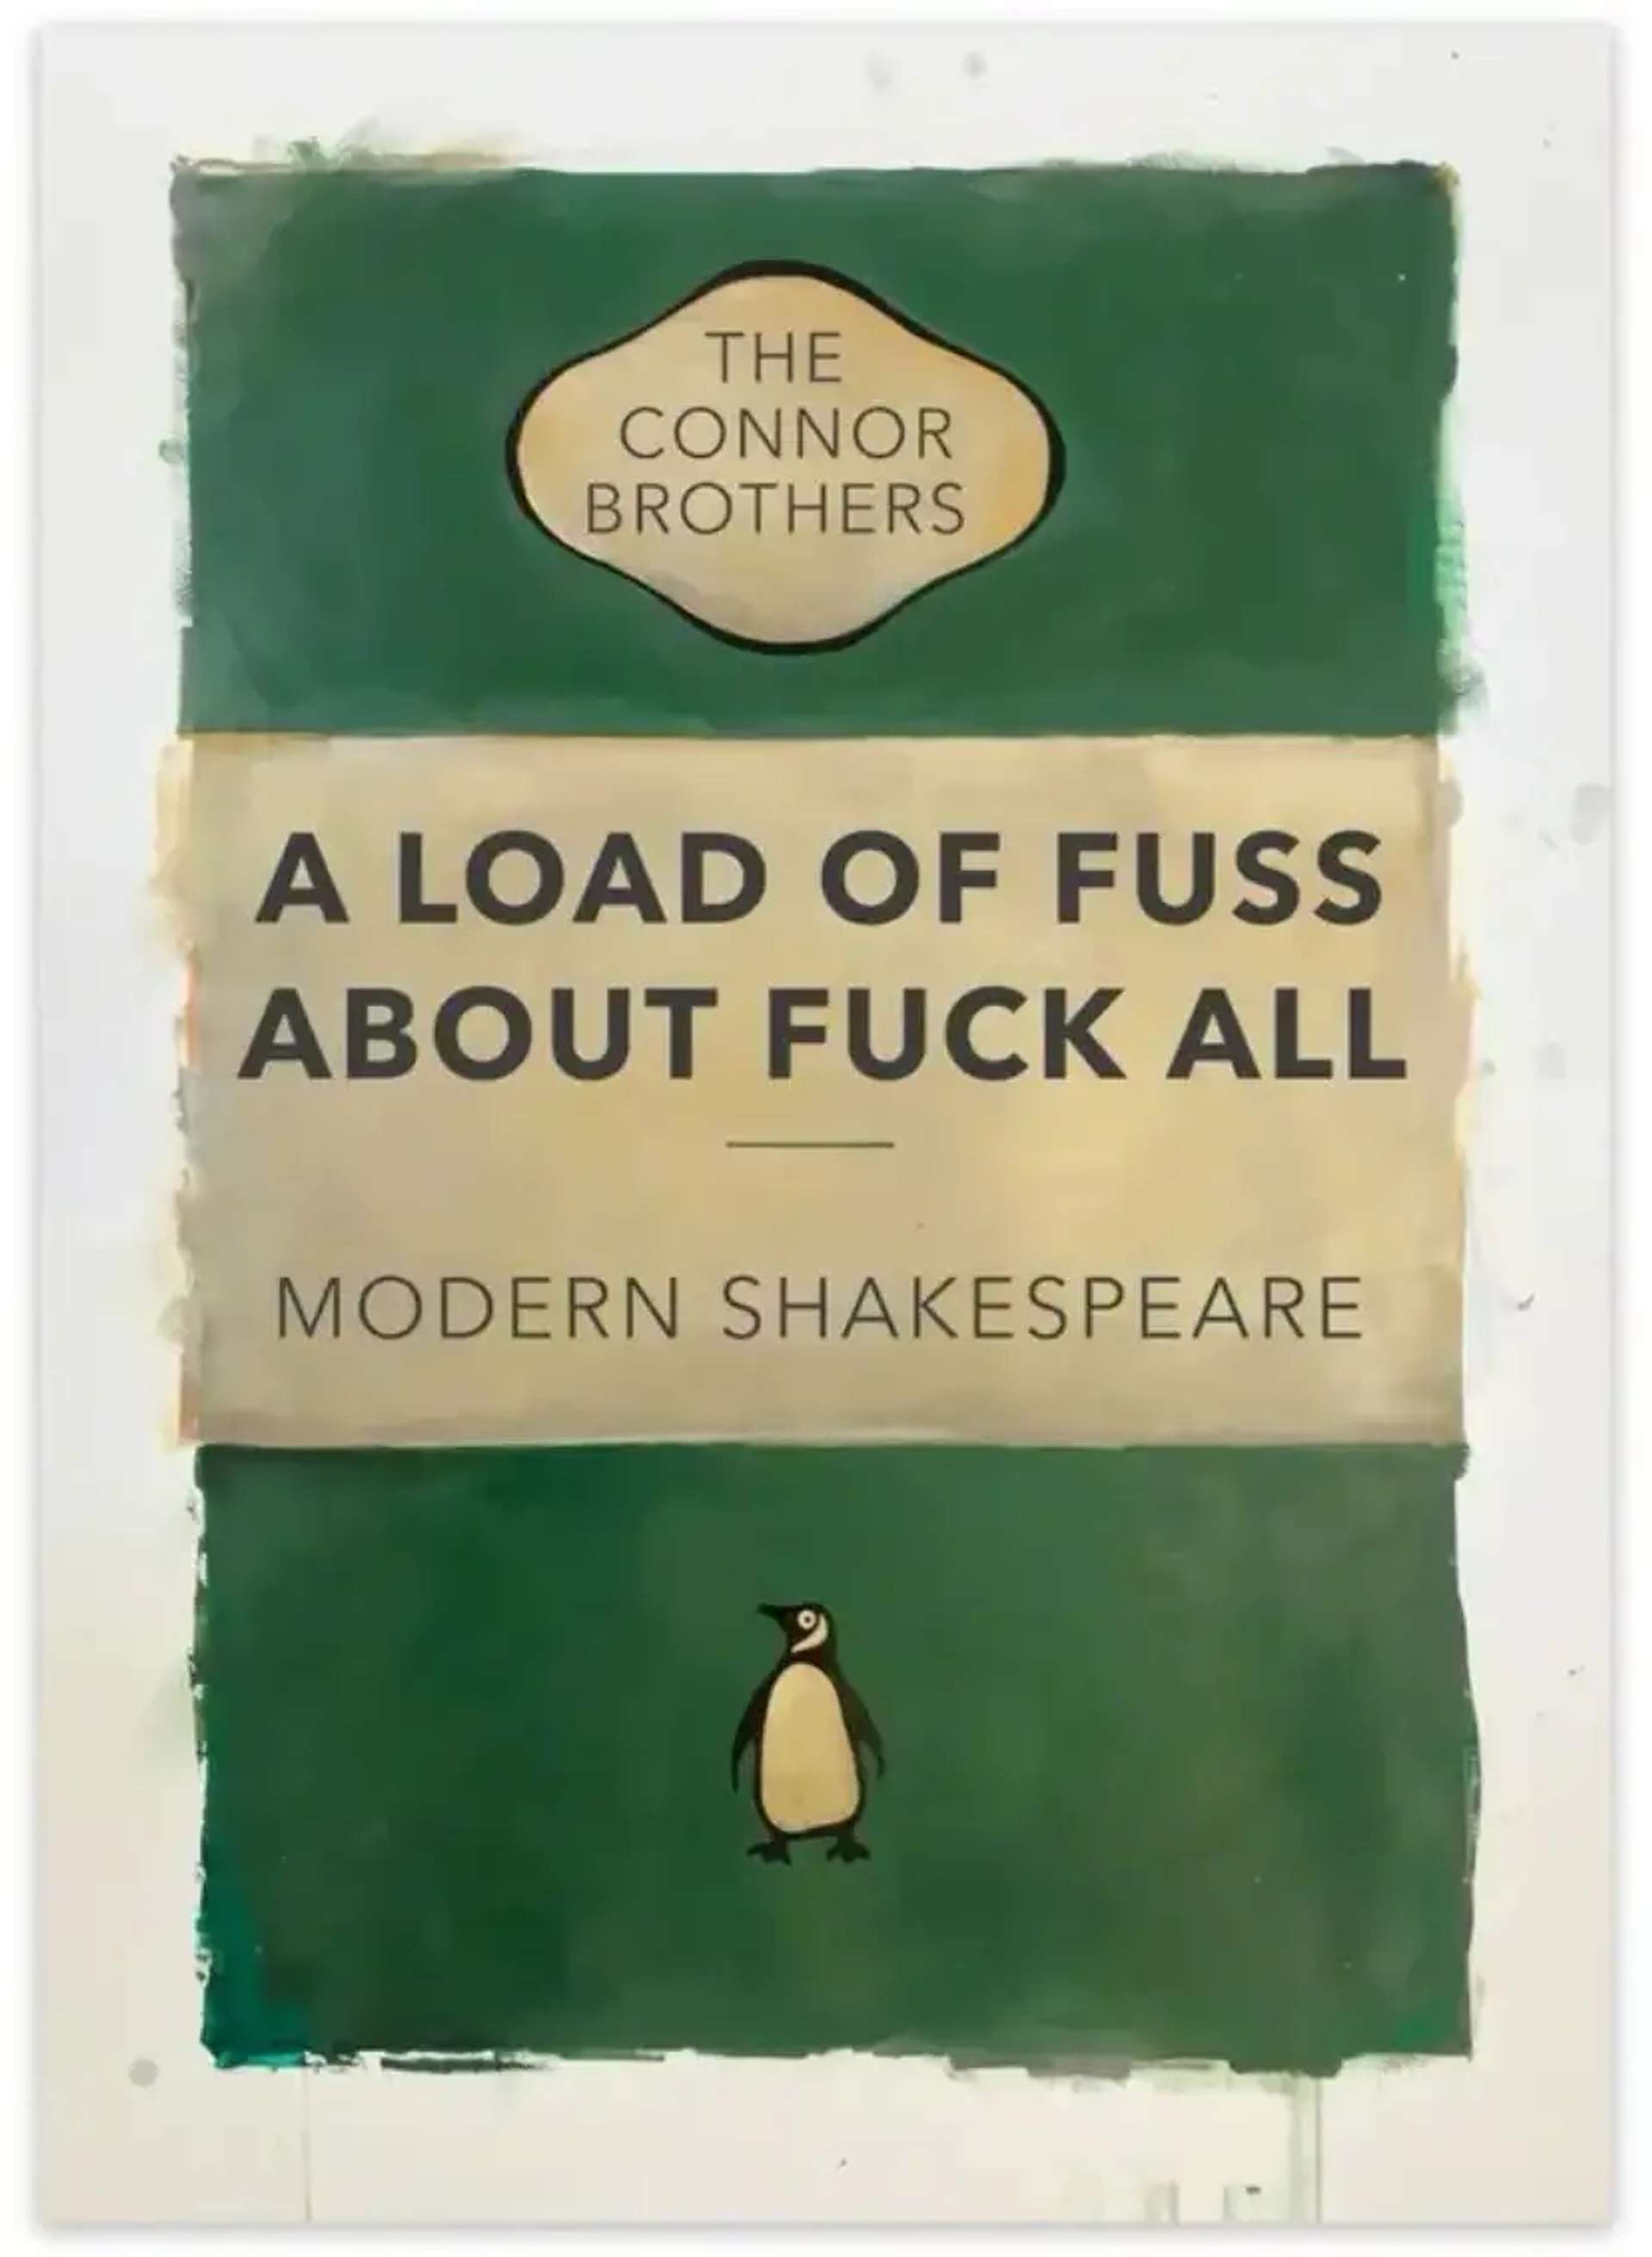 A screenprint artwork depicting a green Penguin book cover titled "A Load of Fuss About Fuck All" by The Connor Brothers. The standard Penguin book logo featuring a penguin is visible at the bottom of the book cover.